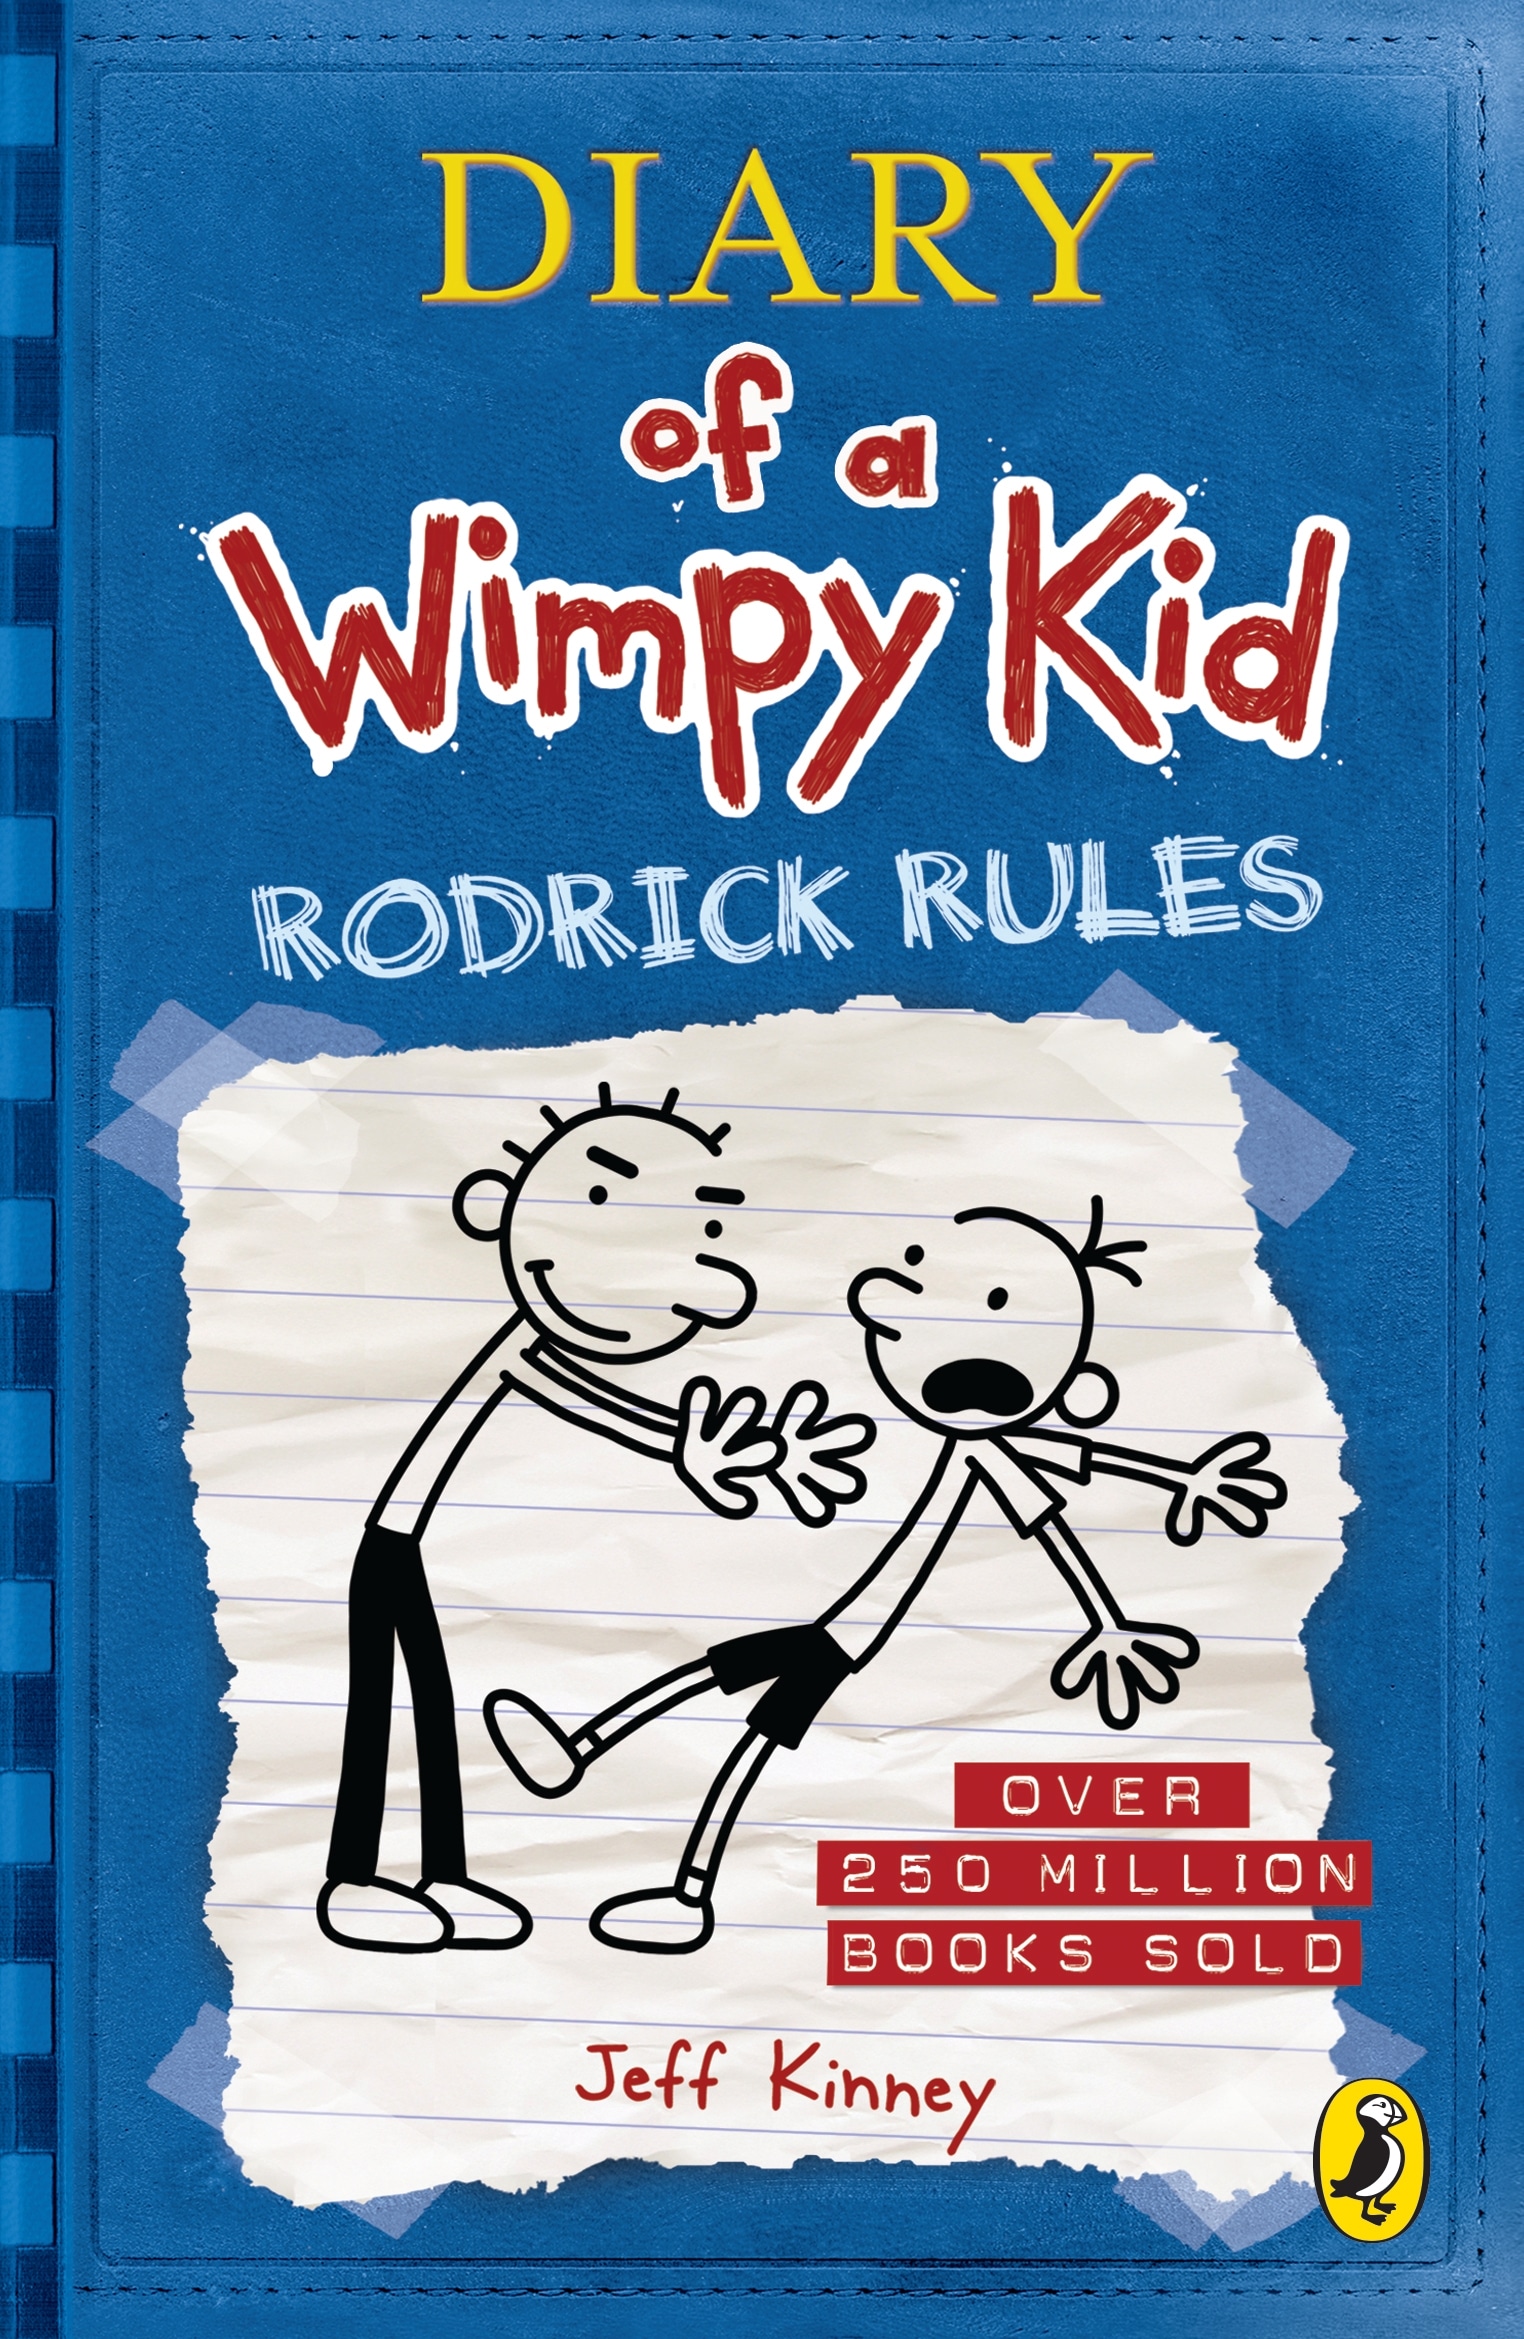 Book “Diary of a Wimpy Kid: Rodrick Rules (Book 2)” by Jeff Kinney — February 5, 2009